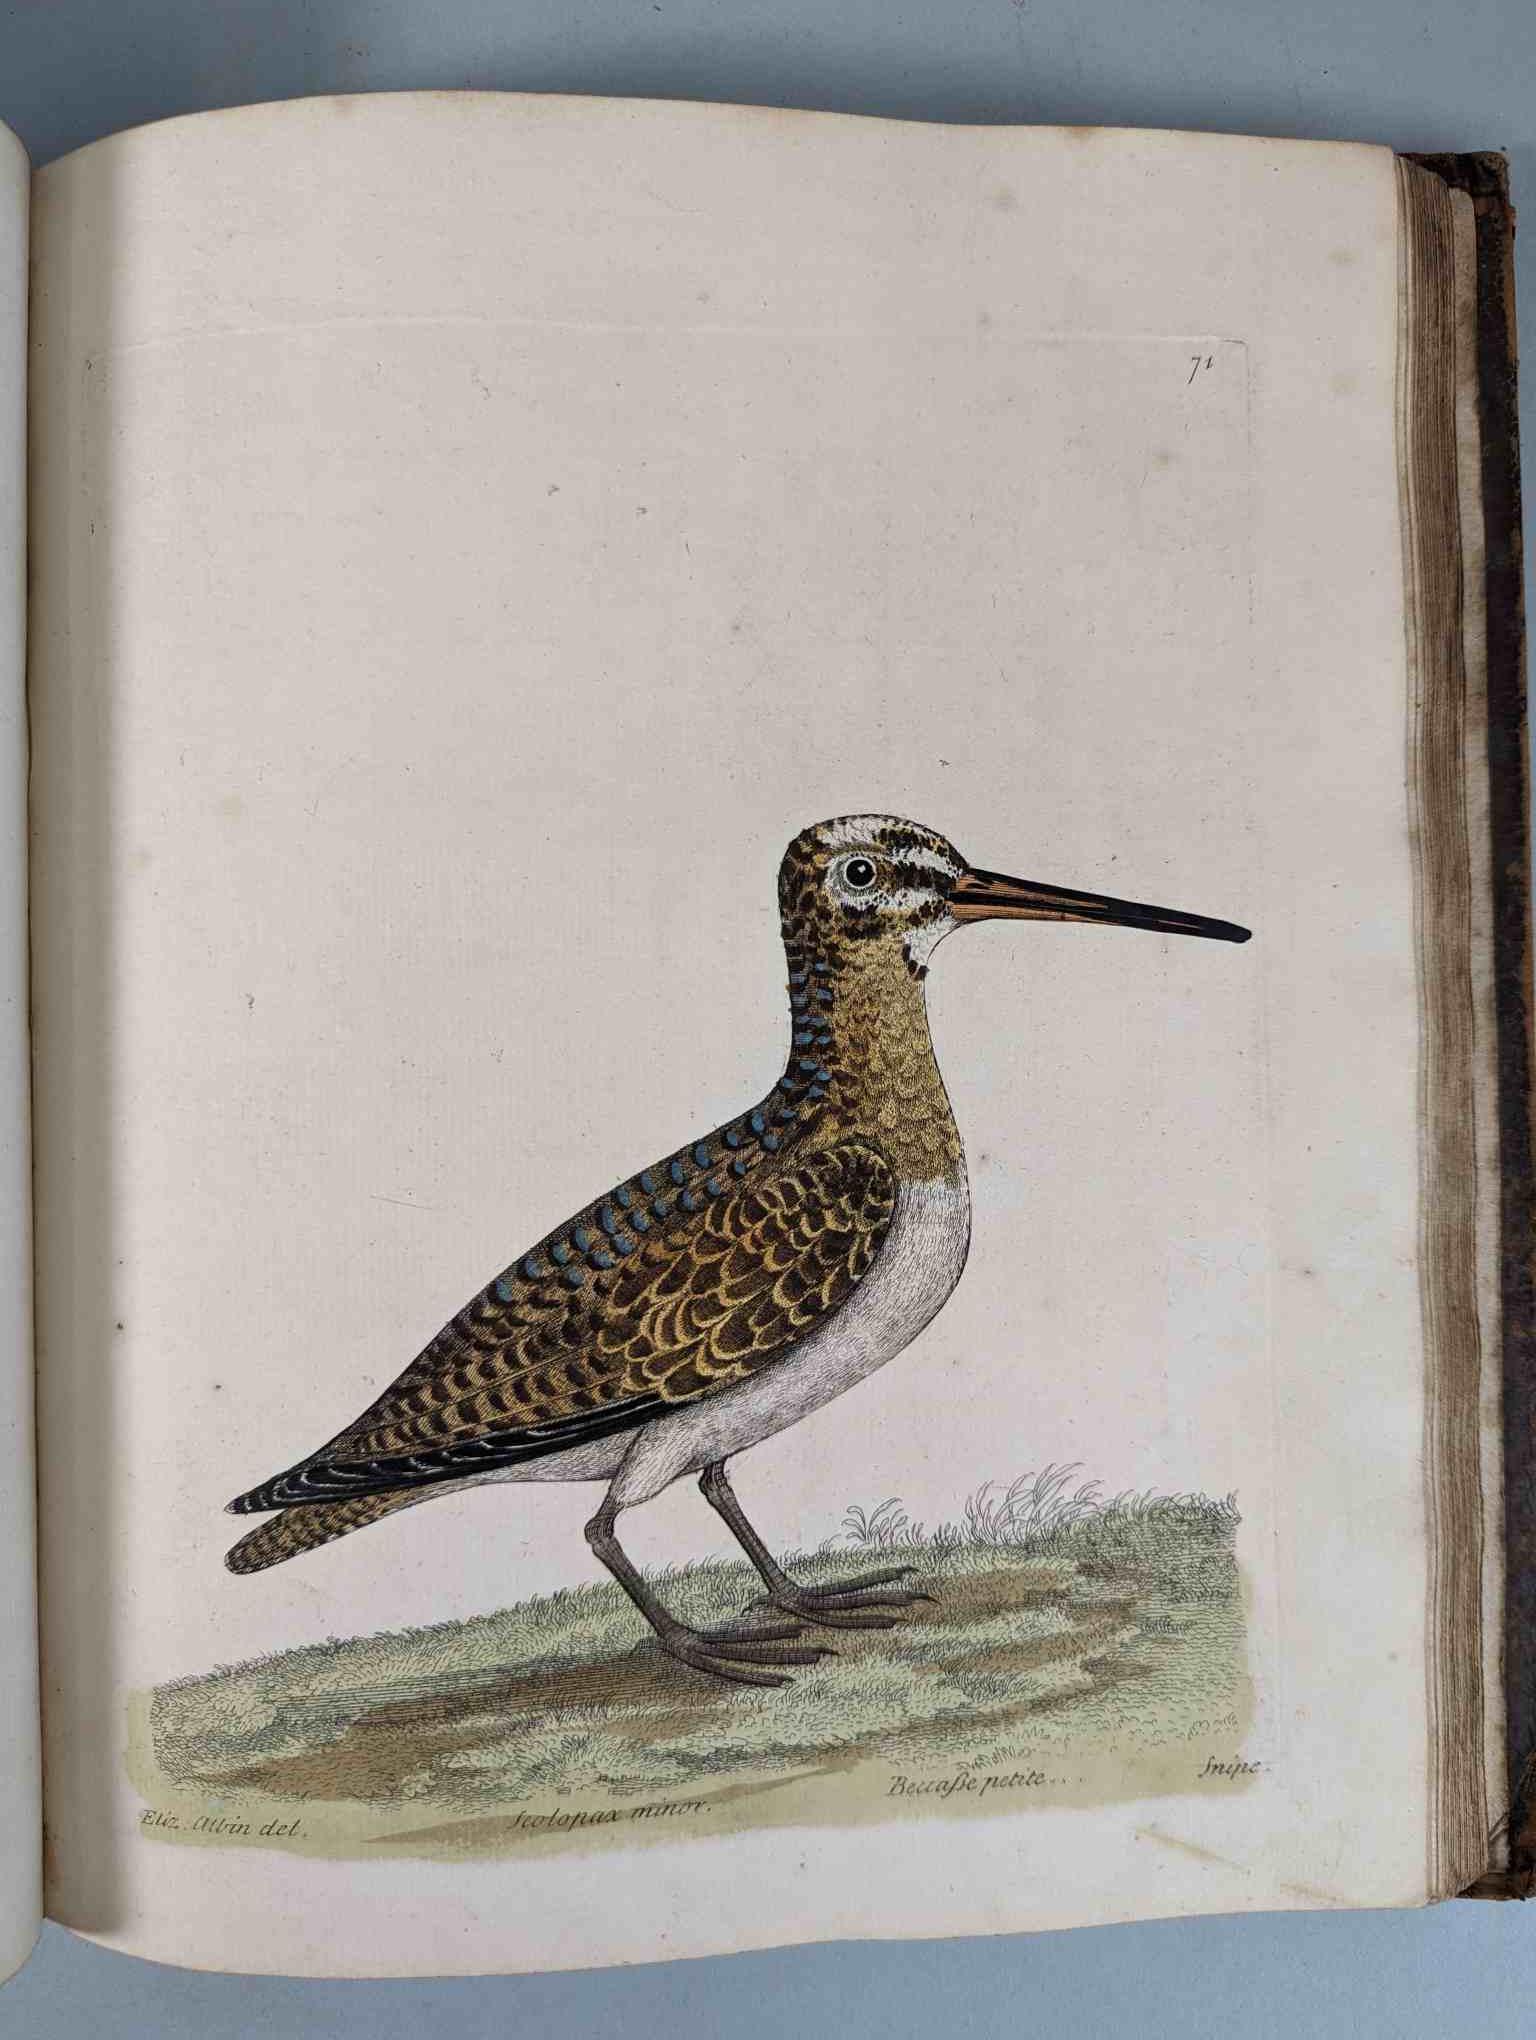 ALBIN, Eleazar. A Natural History of Birds, to which are added, Notes and Observations by W. - Image 74 of 208